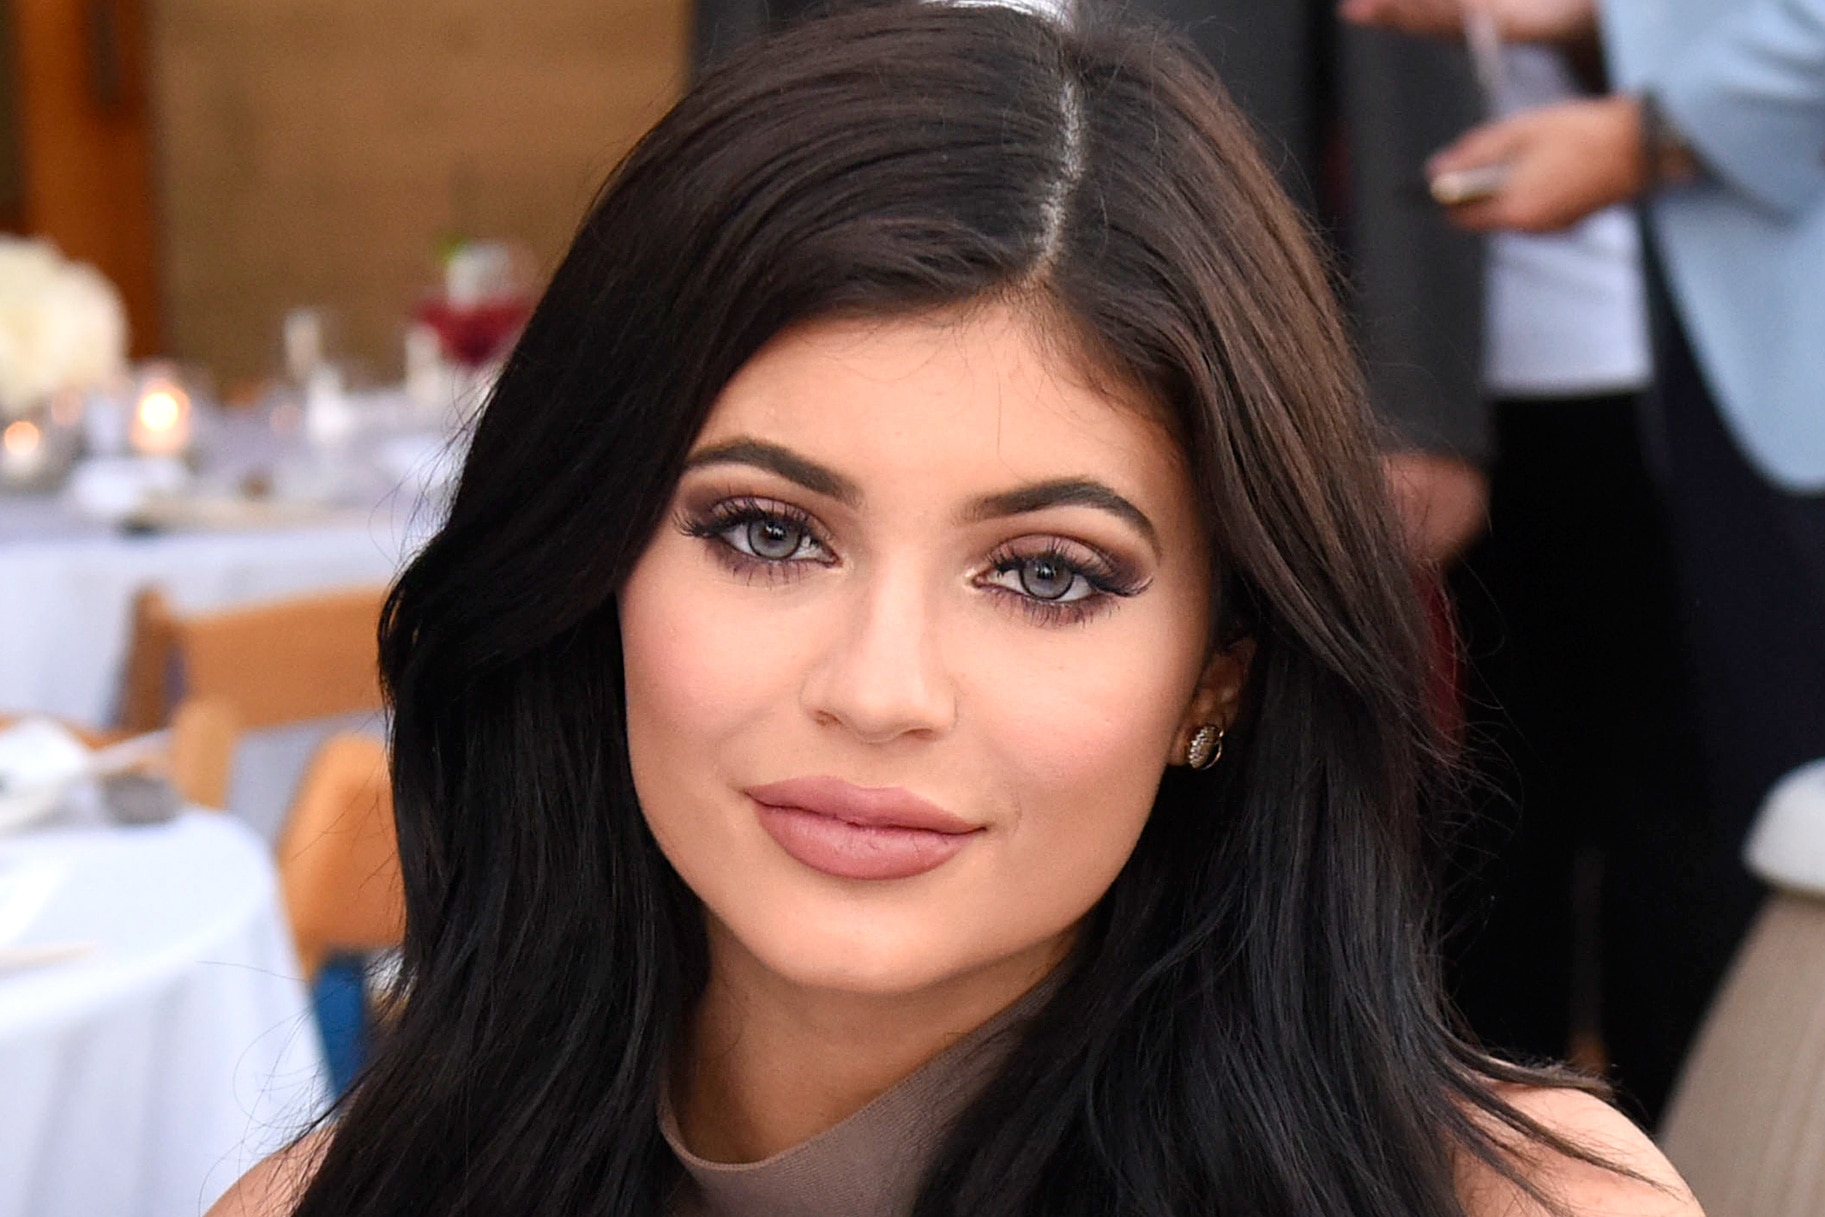 3. "The Secret to Kylie Jenner's Blue Hair: How to Achieve the Look" - wide 9